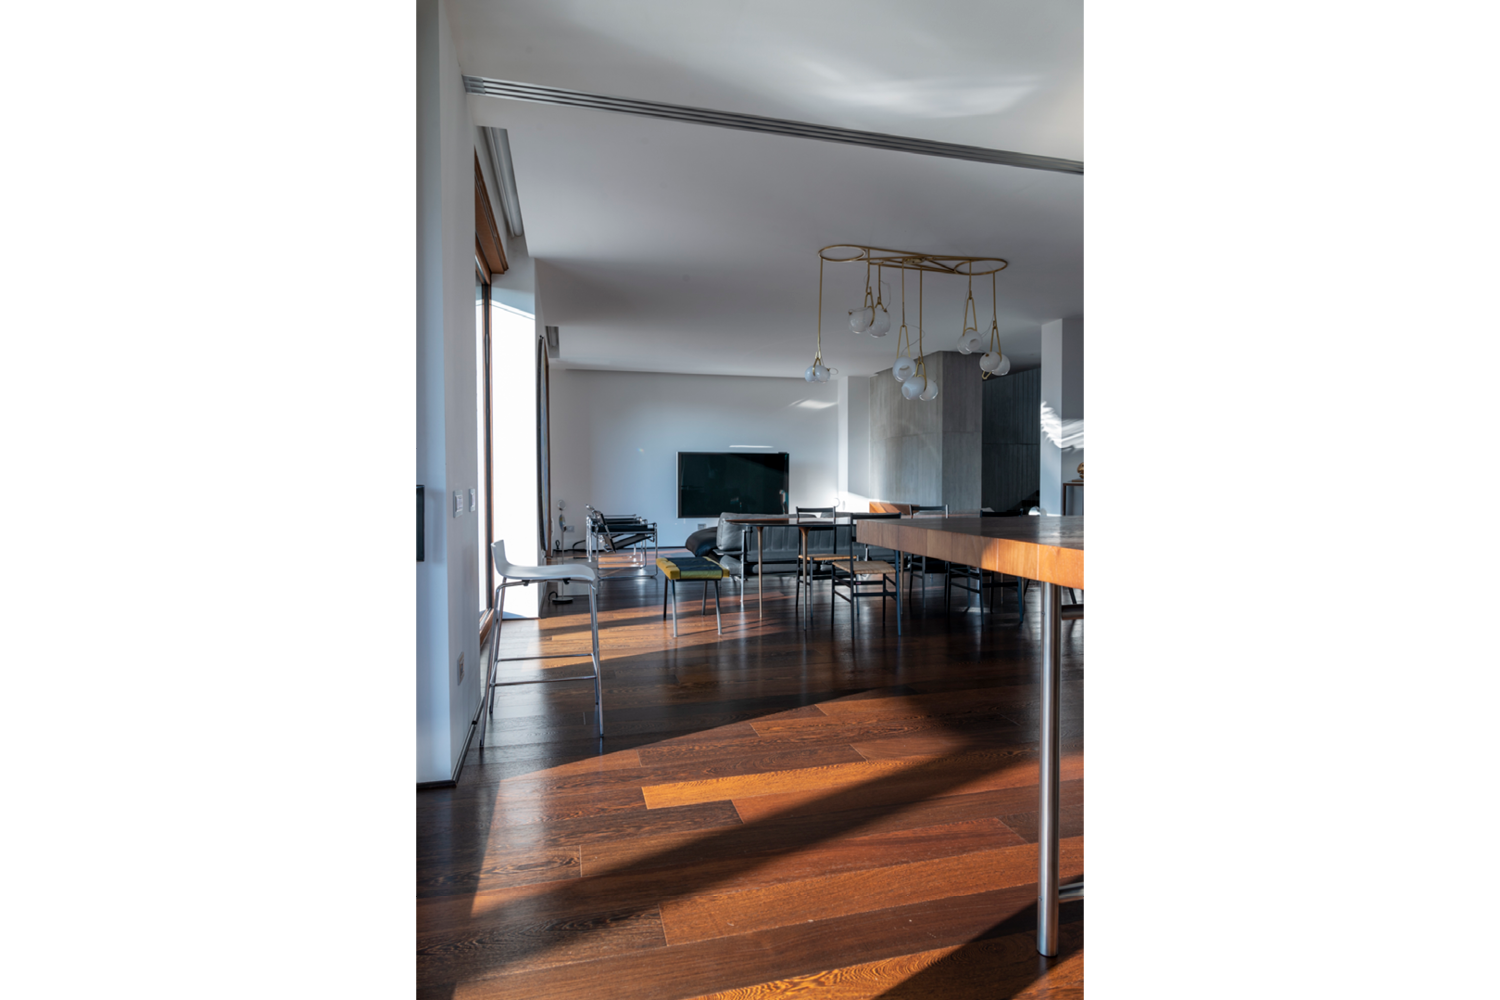 Antico Asolo 3-layers collection Classico Wengè Select, brushed varnished